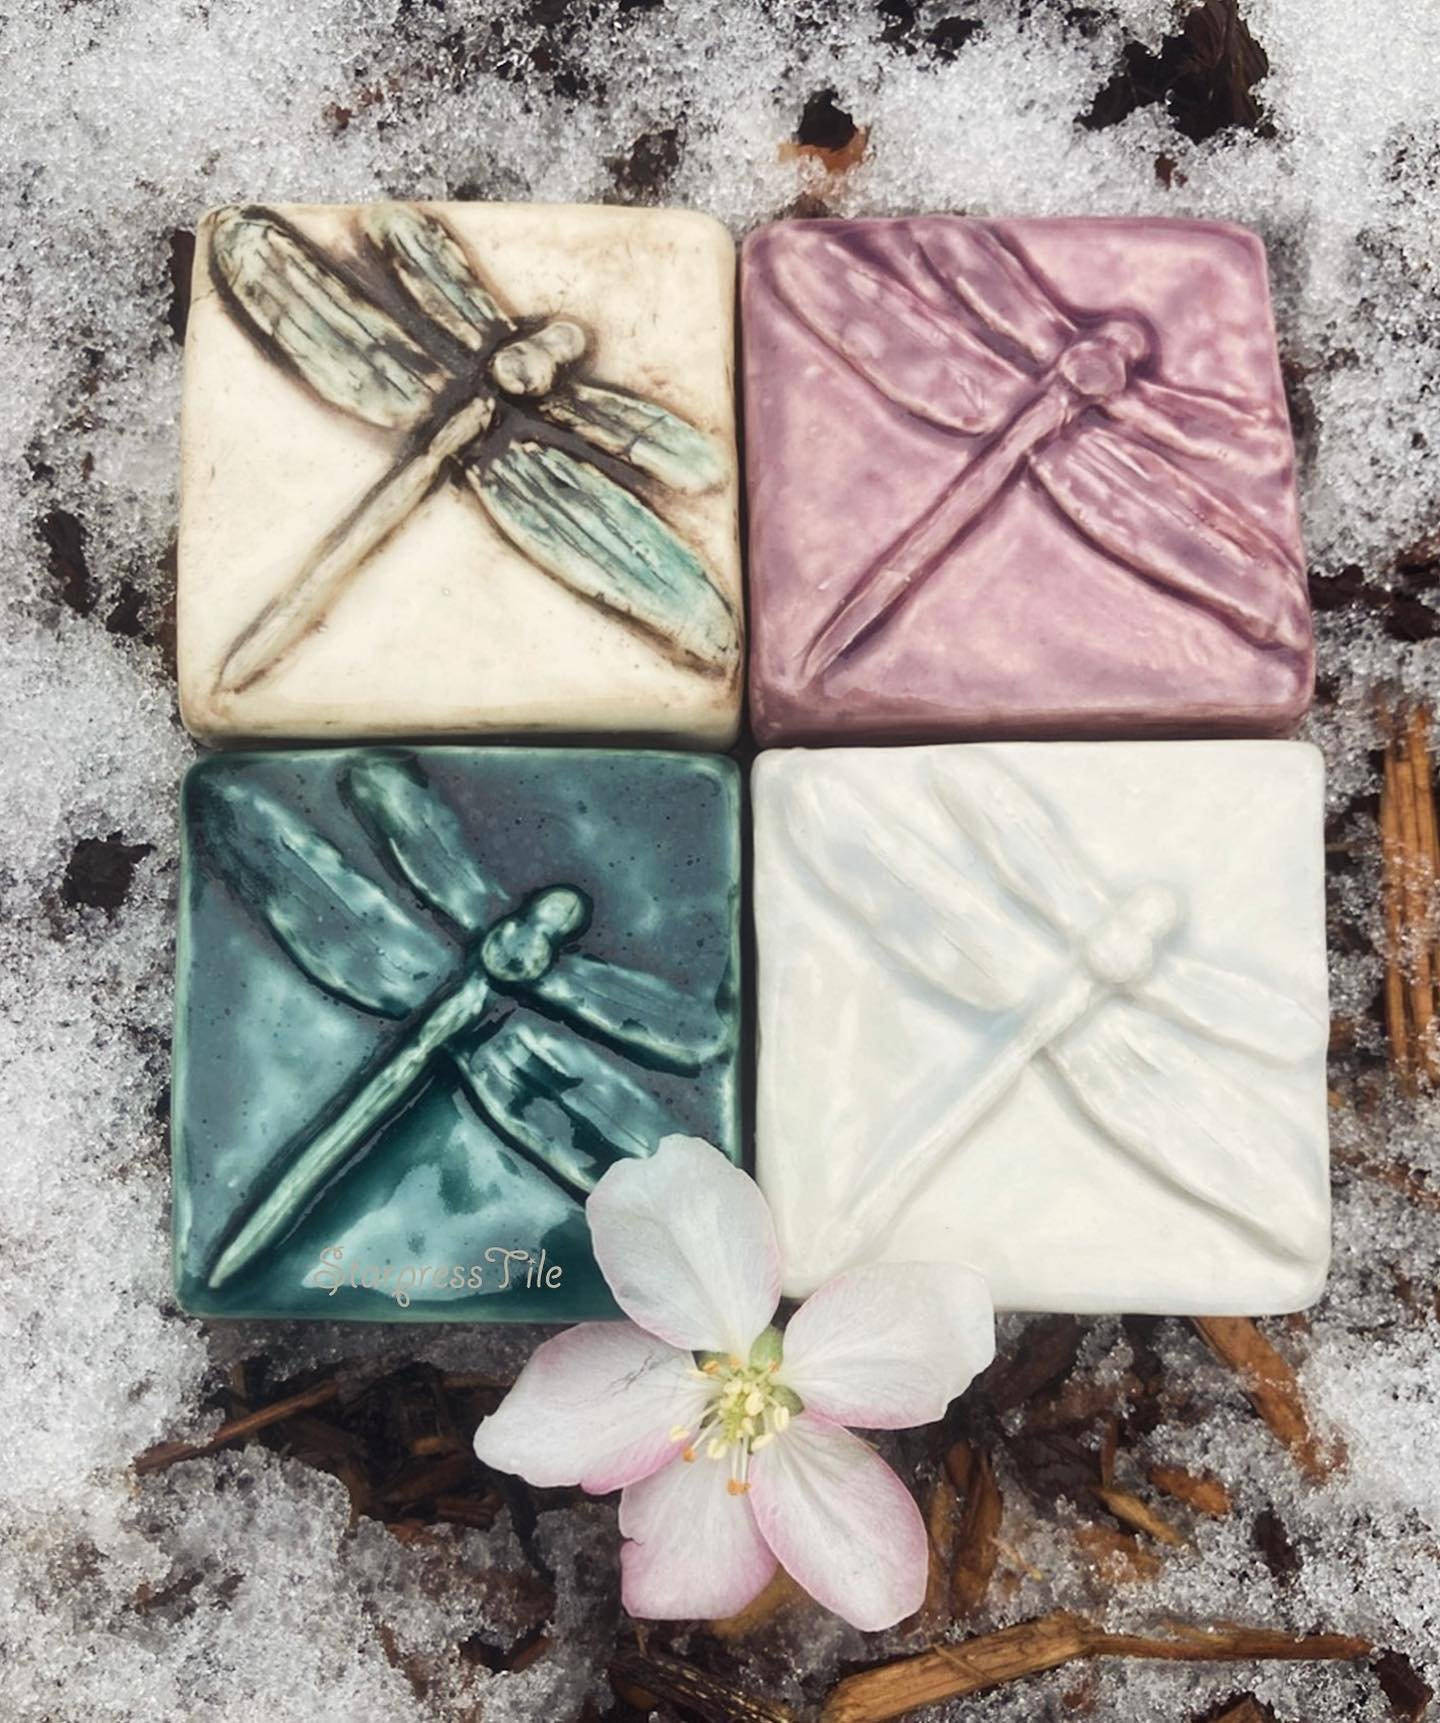 Spring in Colorado, hopefully not to many more snows...❄️. Hope your having a nice day wherever you are!🌸
.
.
.
.
.
.
.
.
.
.
#dragonflytiles #2x2tiles #porcelainclay #dragonflyart #arttiles #springincolorado #inspiredbynature #handmadetiles #madein